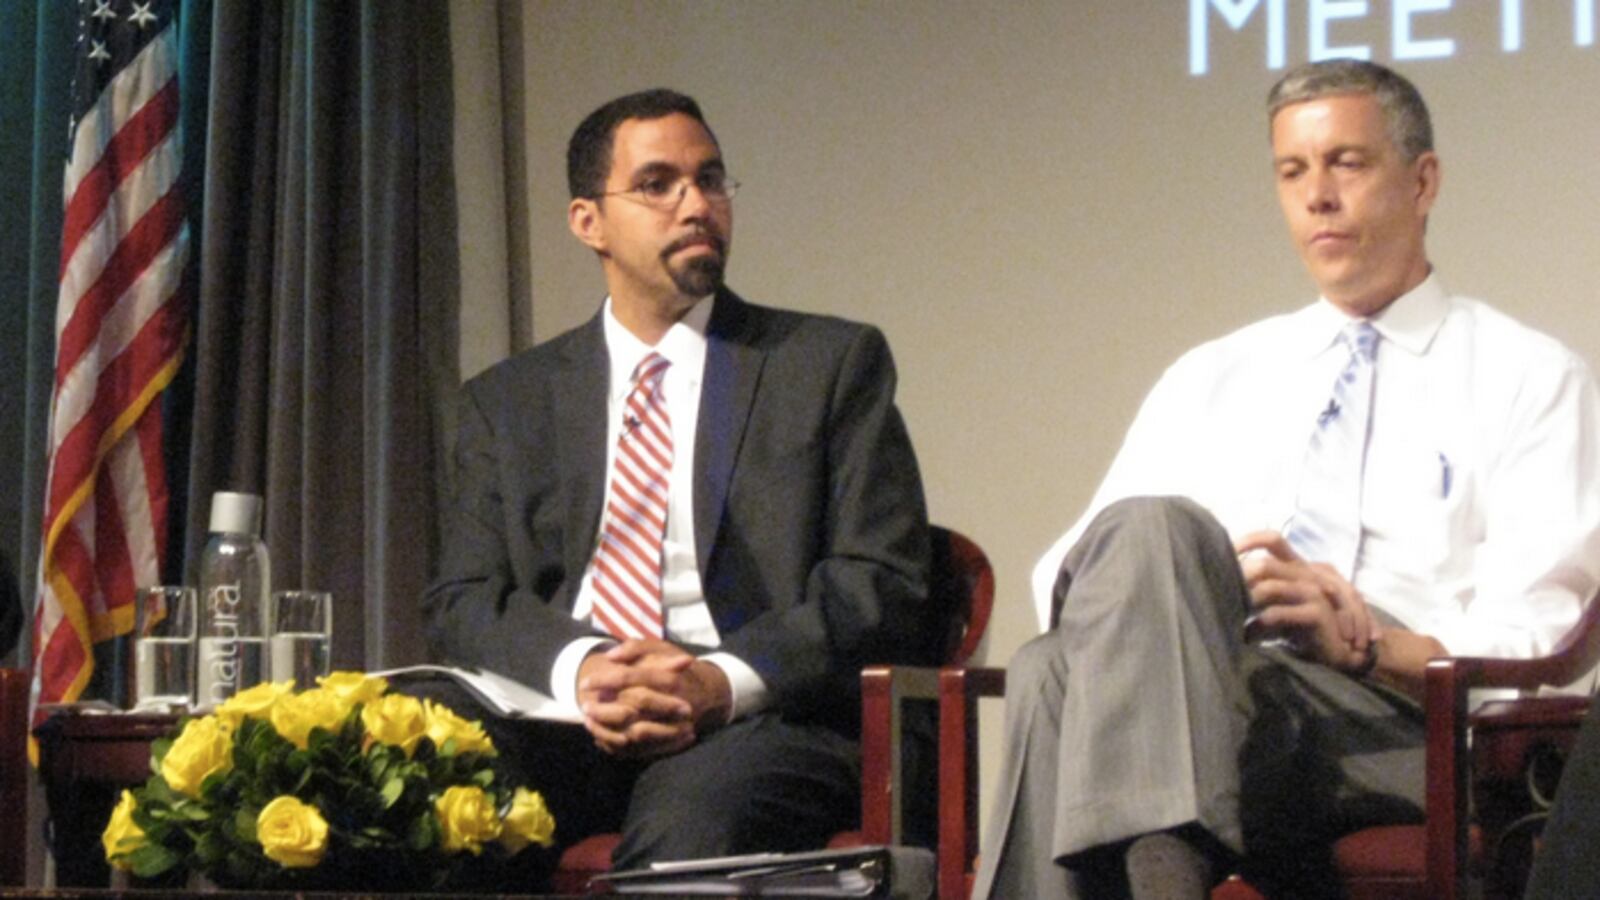 U.S. Education Secretary Arne Duncan and then-New York State schools chief John King in 2012.